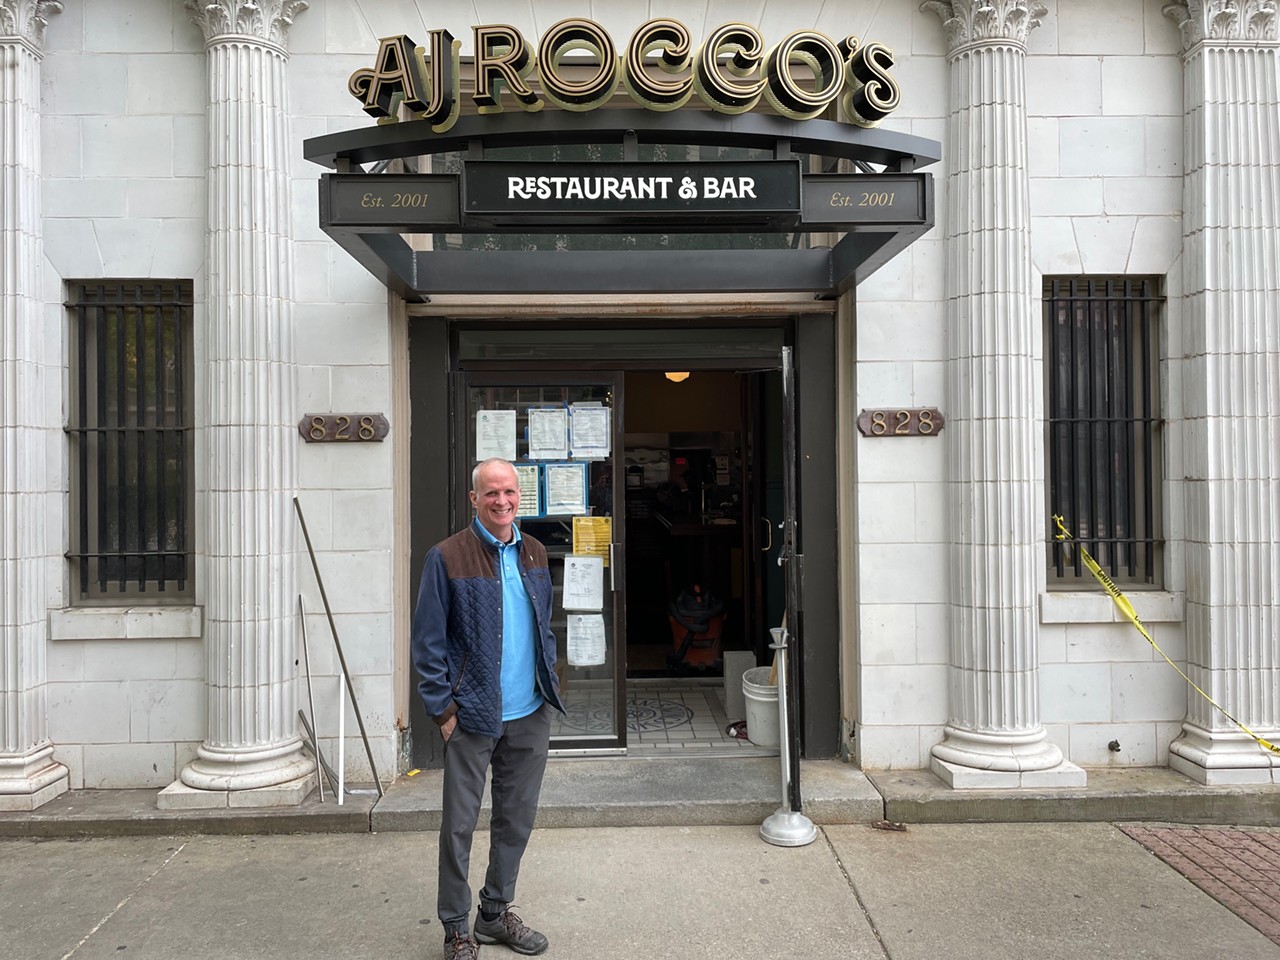 A.J. Rocco’s 
A. Brendan Walton closed A. J. Rocco’s, his convivial Gateway District café, at the tail end of 2019, but within months he was planning to reinvent the spot a few doors down. After a gut renovation of the former Huron Point Tavern (and Alesci's Downtown) space, Rocco’s 2.0 is ready to welcome its first guests. At full bore, the two-level, three-bar eatery can serve 170 guests, but cozy nooks and private areas provide the flexibility to use the space as needed. Walton plans to ease into things with respect to food. Chef Devin Cerjan will offer approachable food that aims to fill the niche between basic fast-casual and pricy fine-dining. Diners can expect wings, sandwiches, burgers, pizzas and mac and cheese, plus nightly specials like pastas, steaks and seafood.